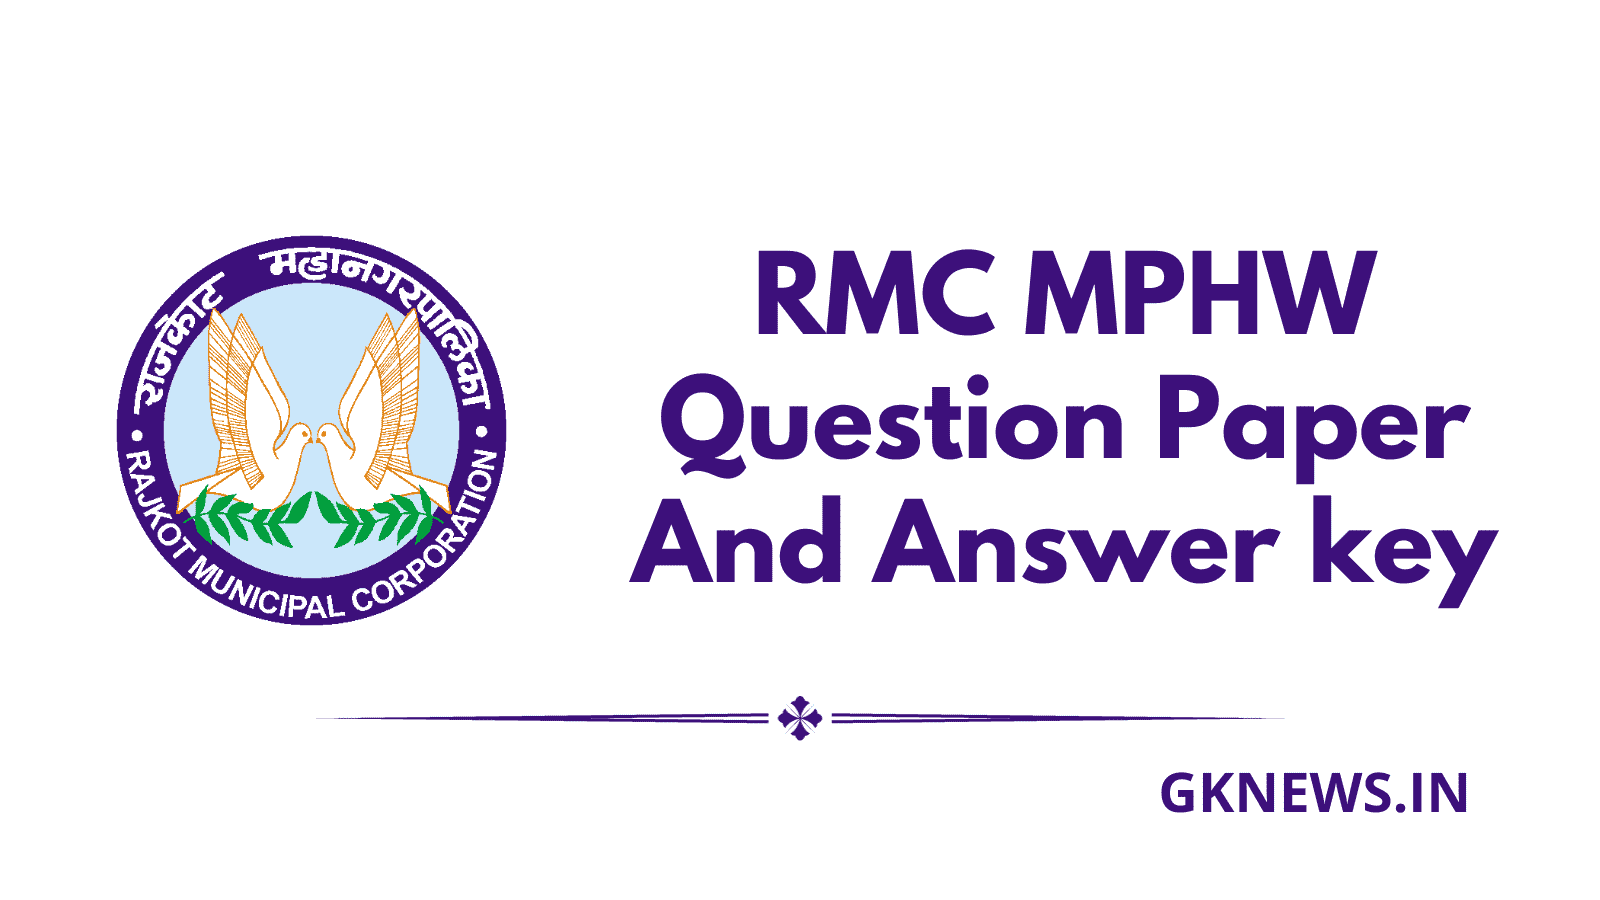 RMC MPHW Question Paper